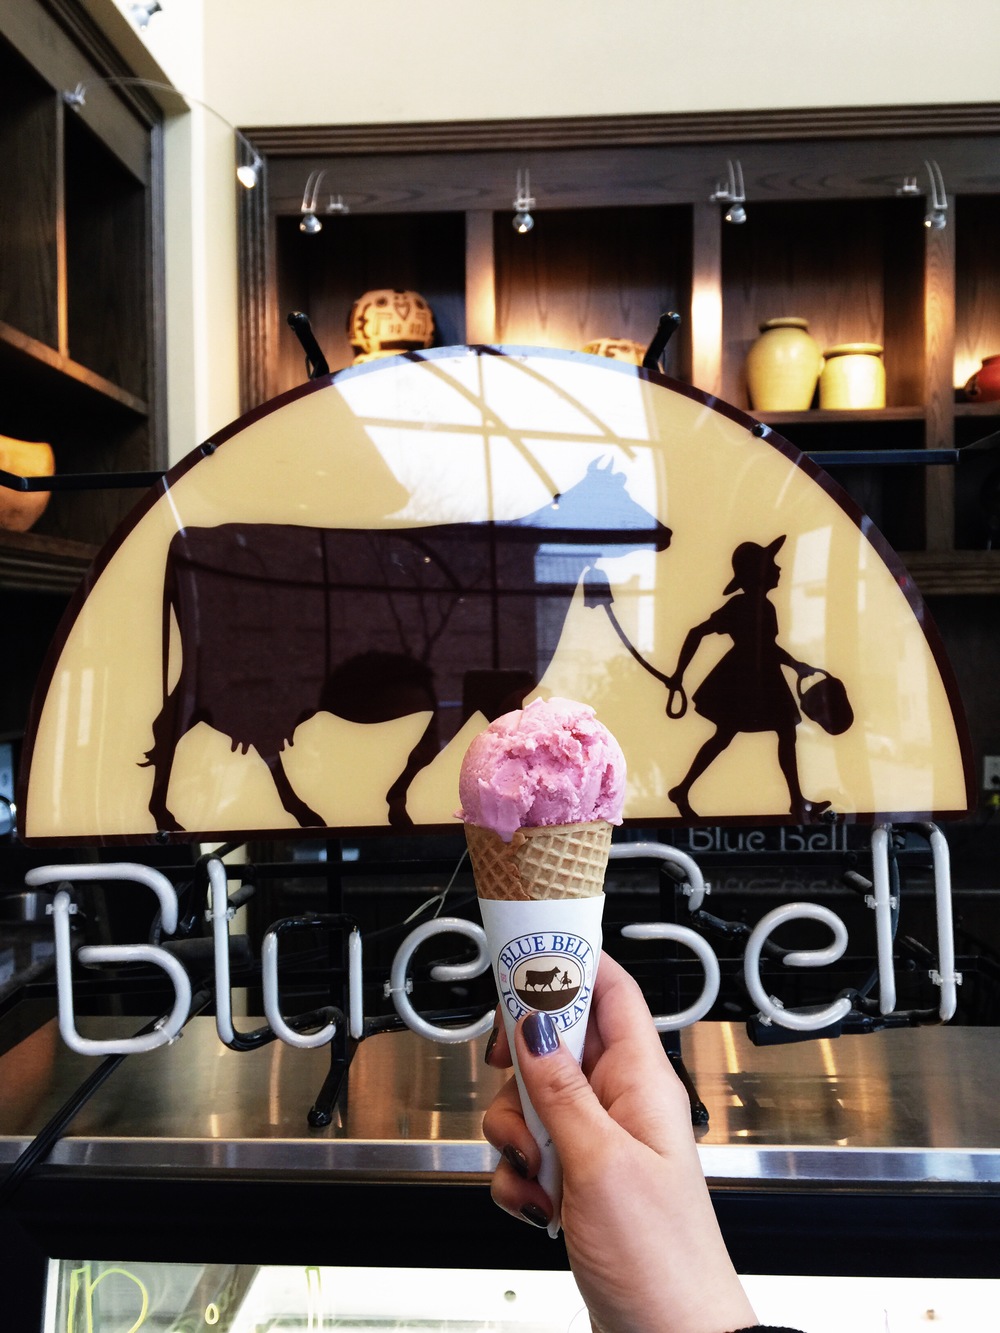   {the closest thing to bluebell creameries to us. java jive inside of our hotel! strawberry ice cream.}  